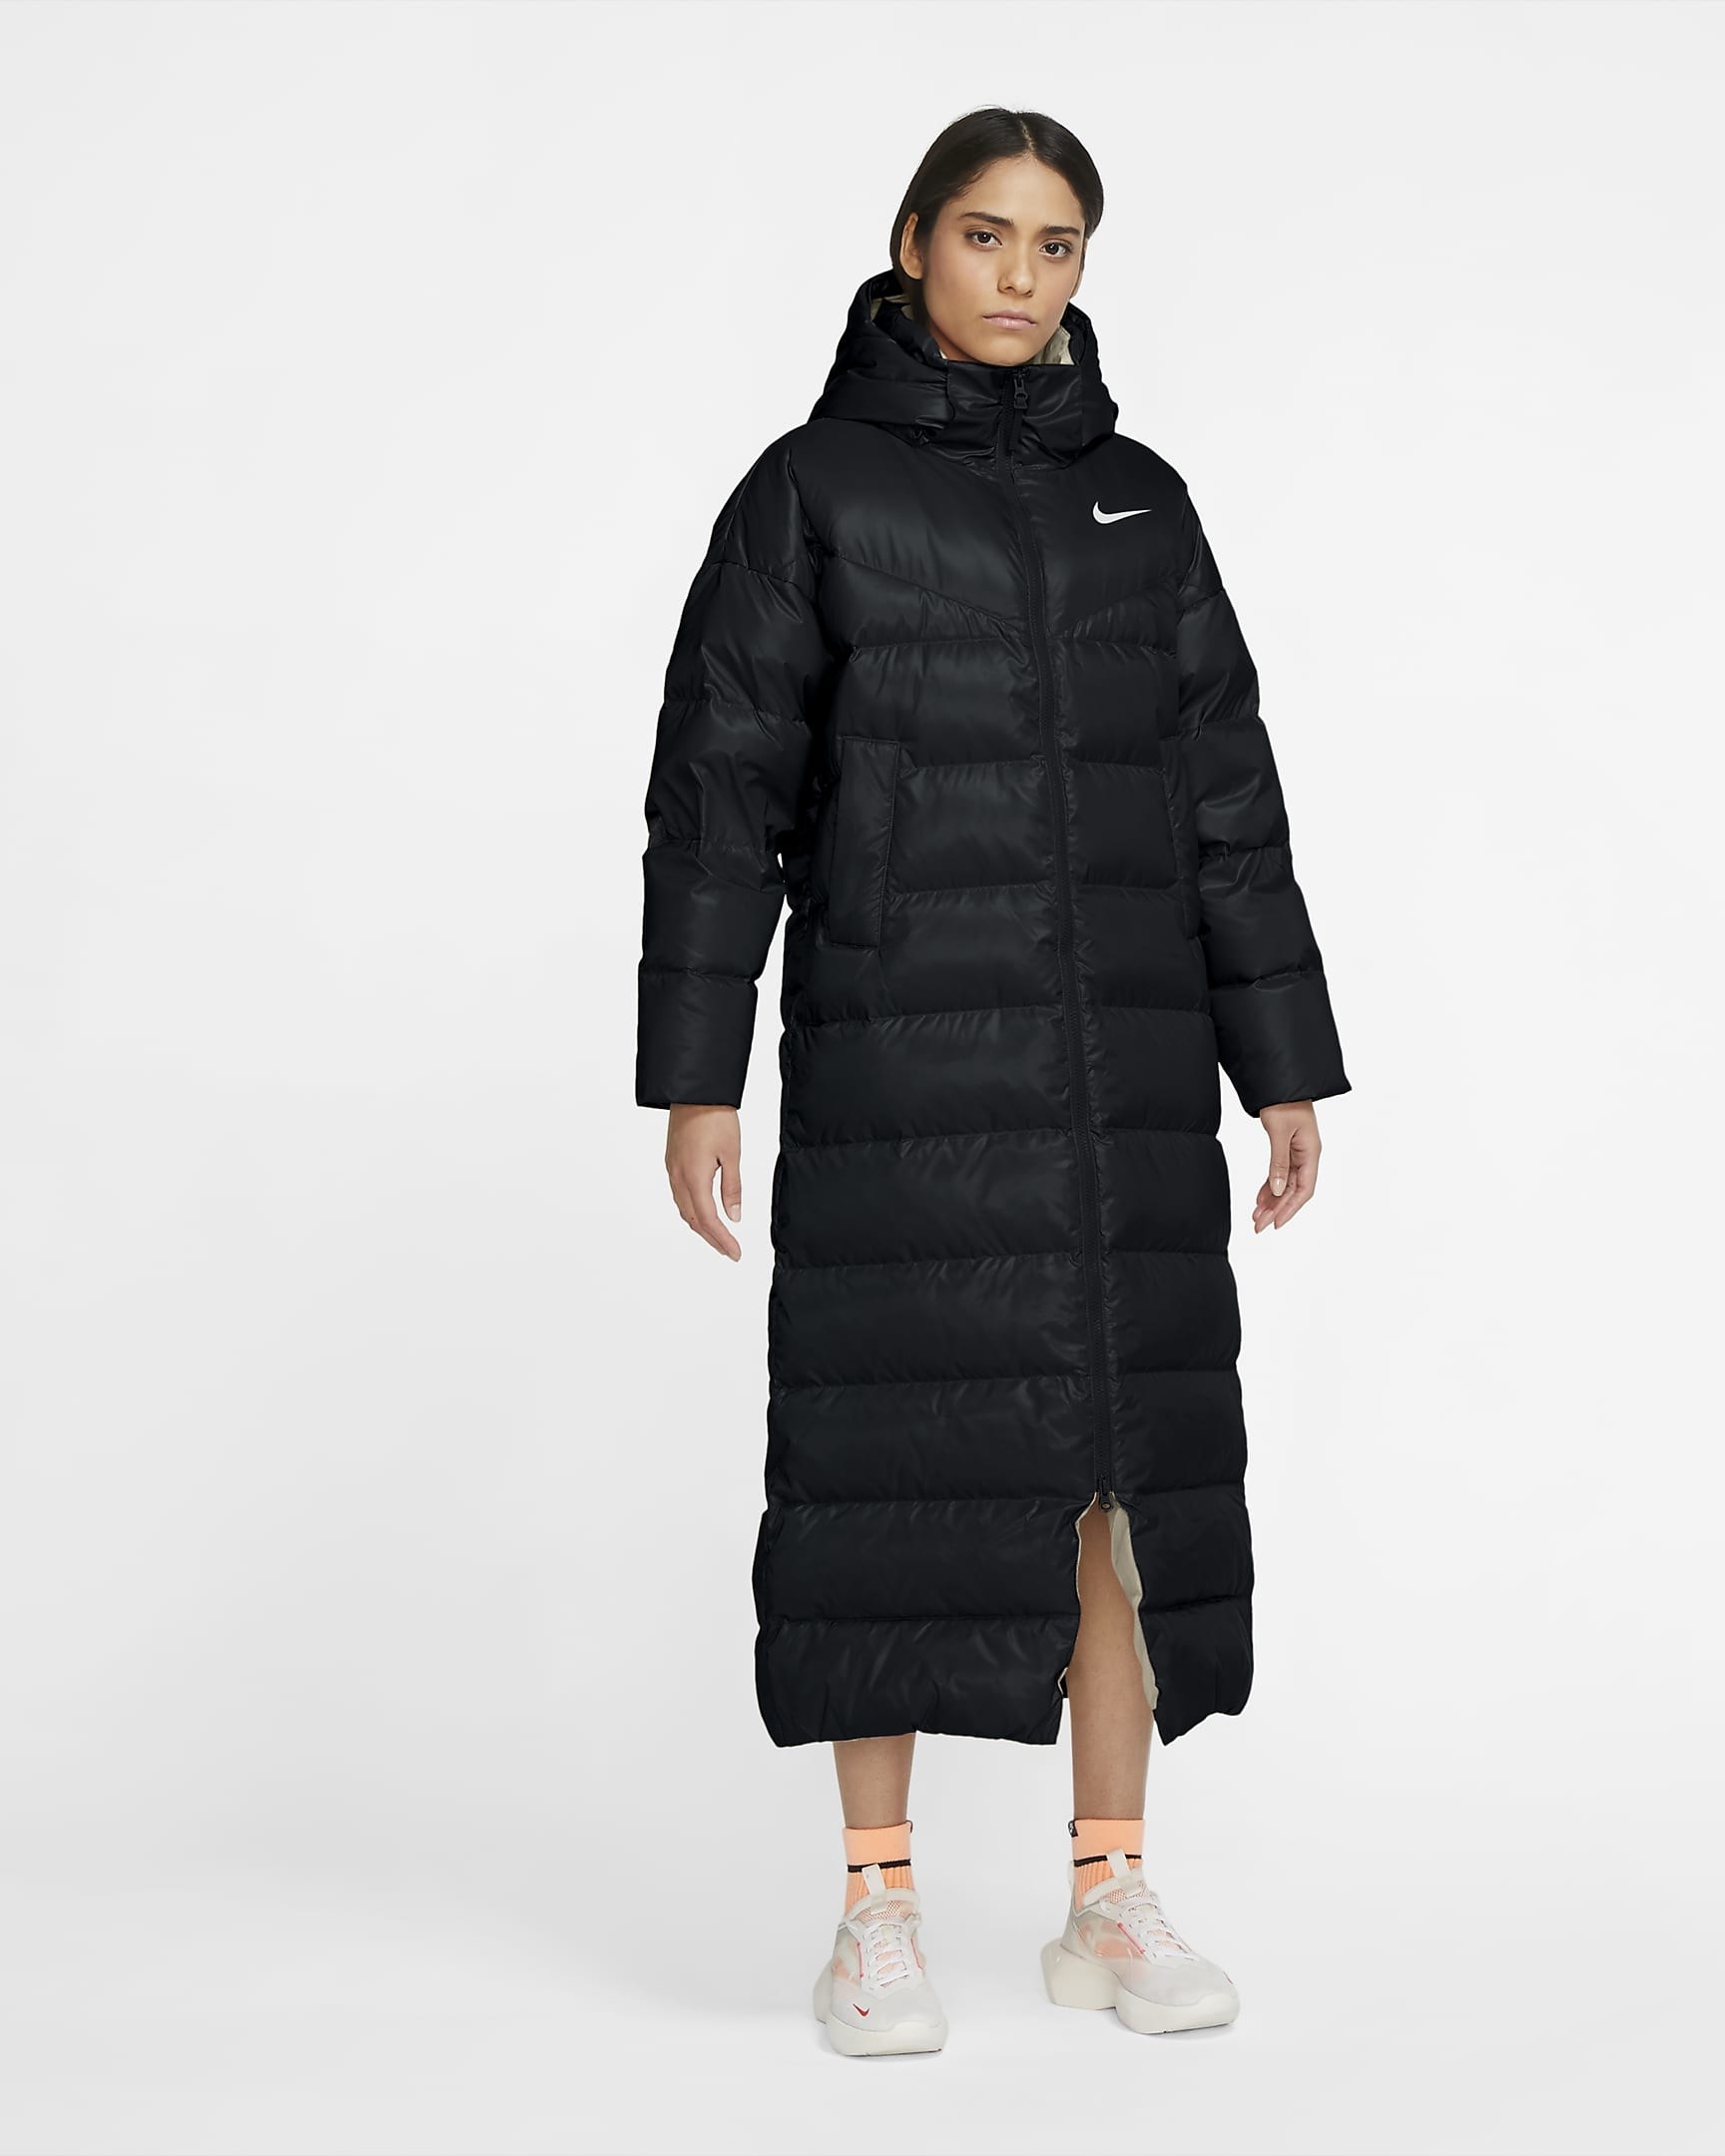 20 Things From Nike That Are Perfect For Cold Weather